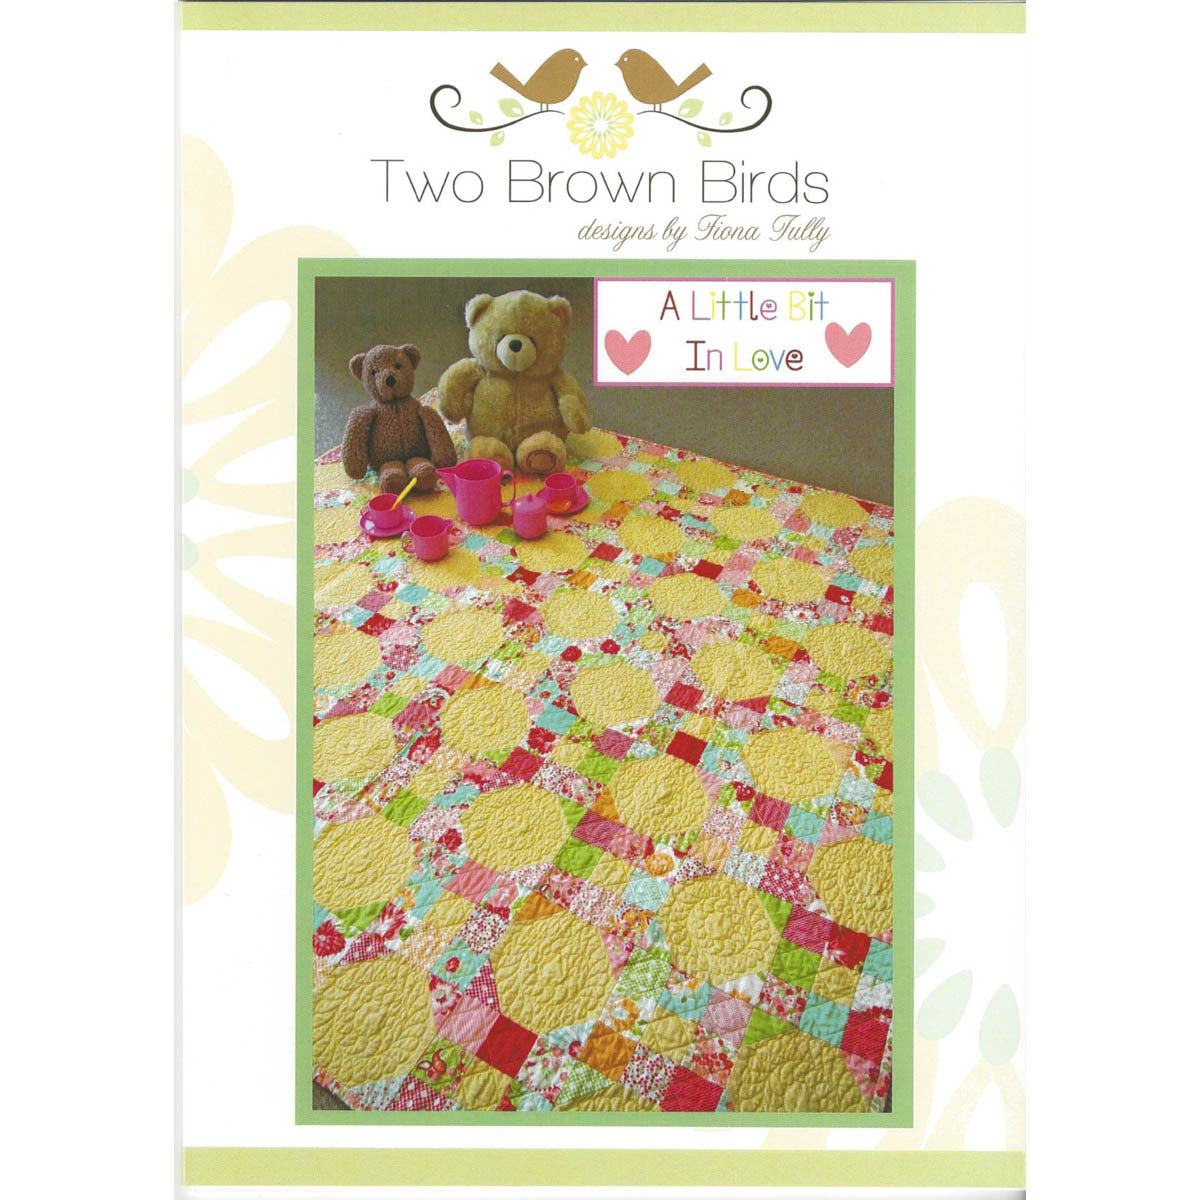 A LITTLE BIT IN LOVE - Quilt Pattern - by Australian Designer Fiona Tully - brand Two Brown Birds